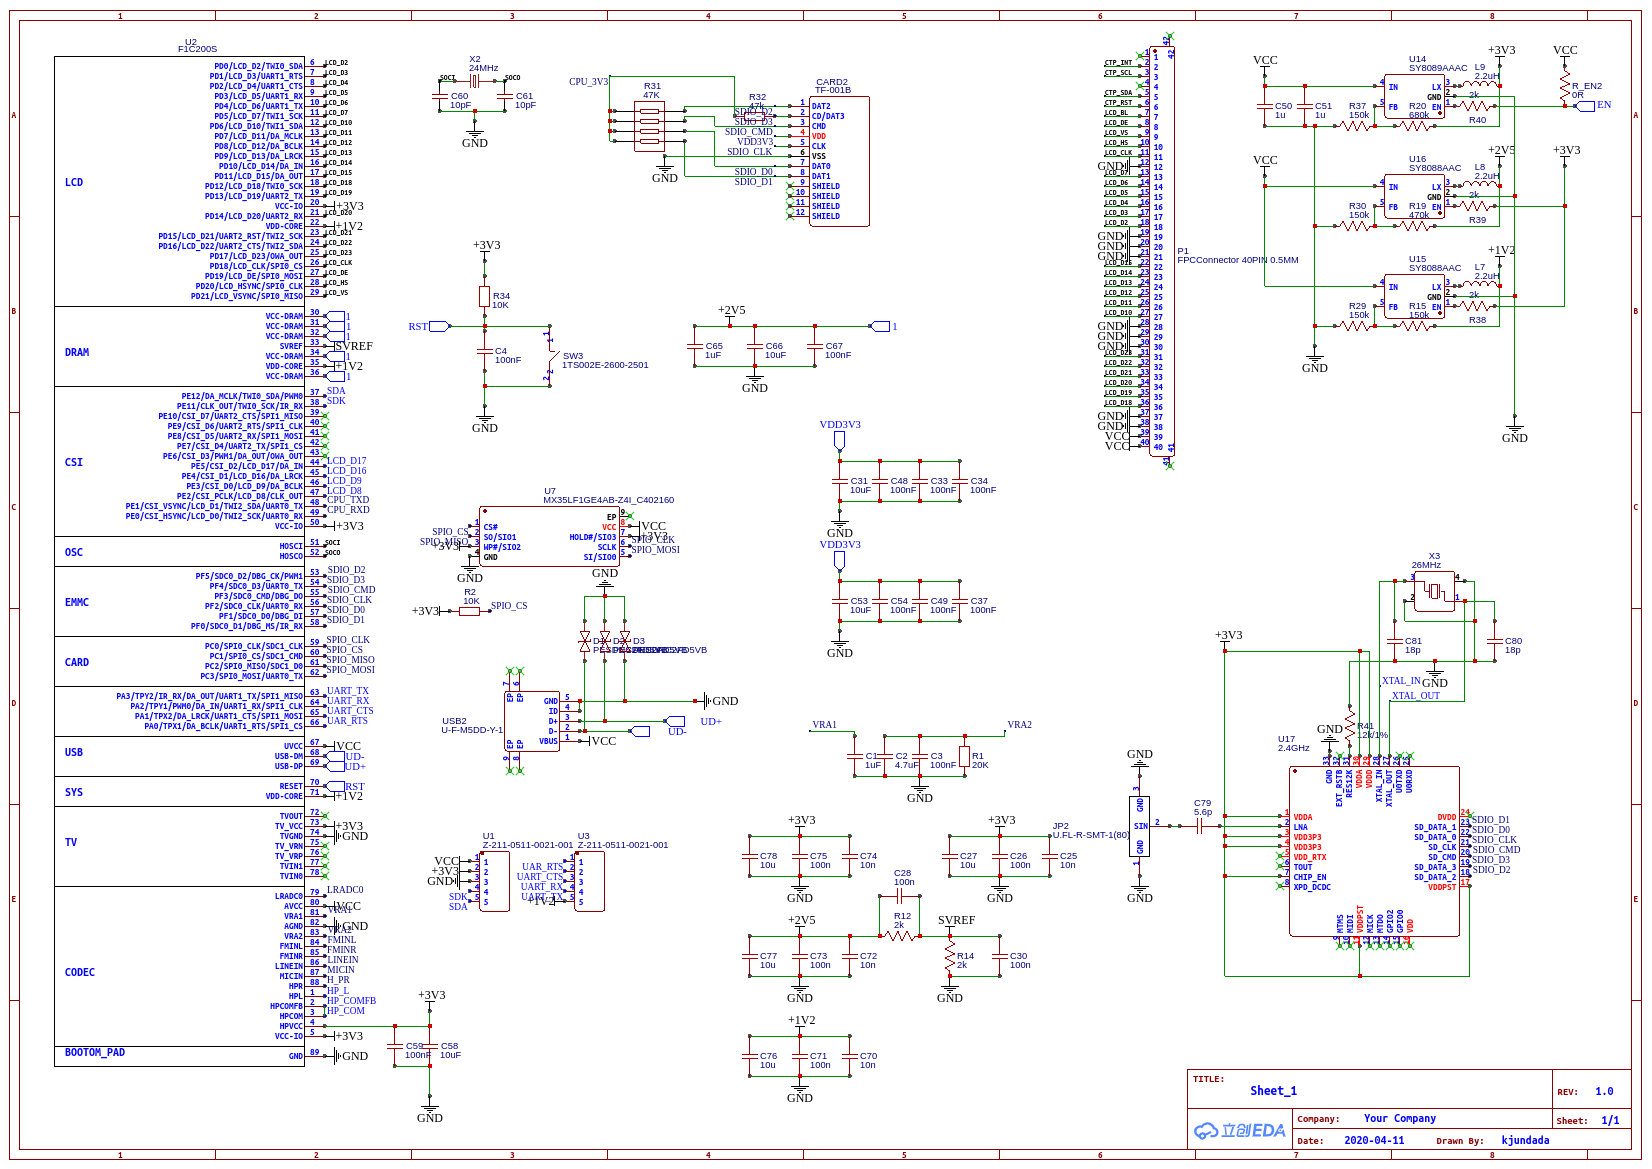 Schematic_micro-computer_2020-04-13_12-07-22.png